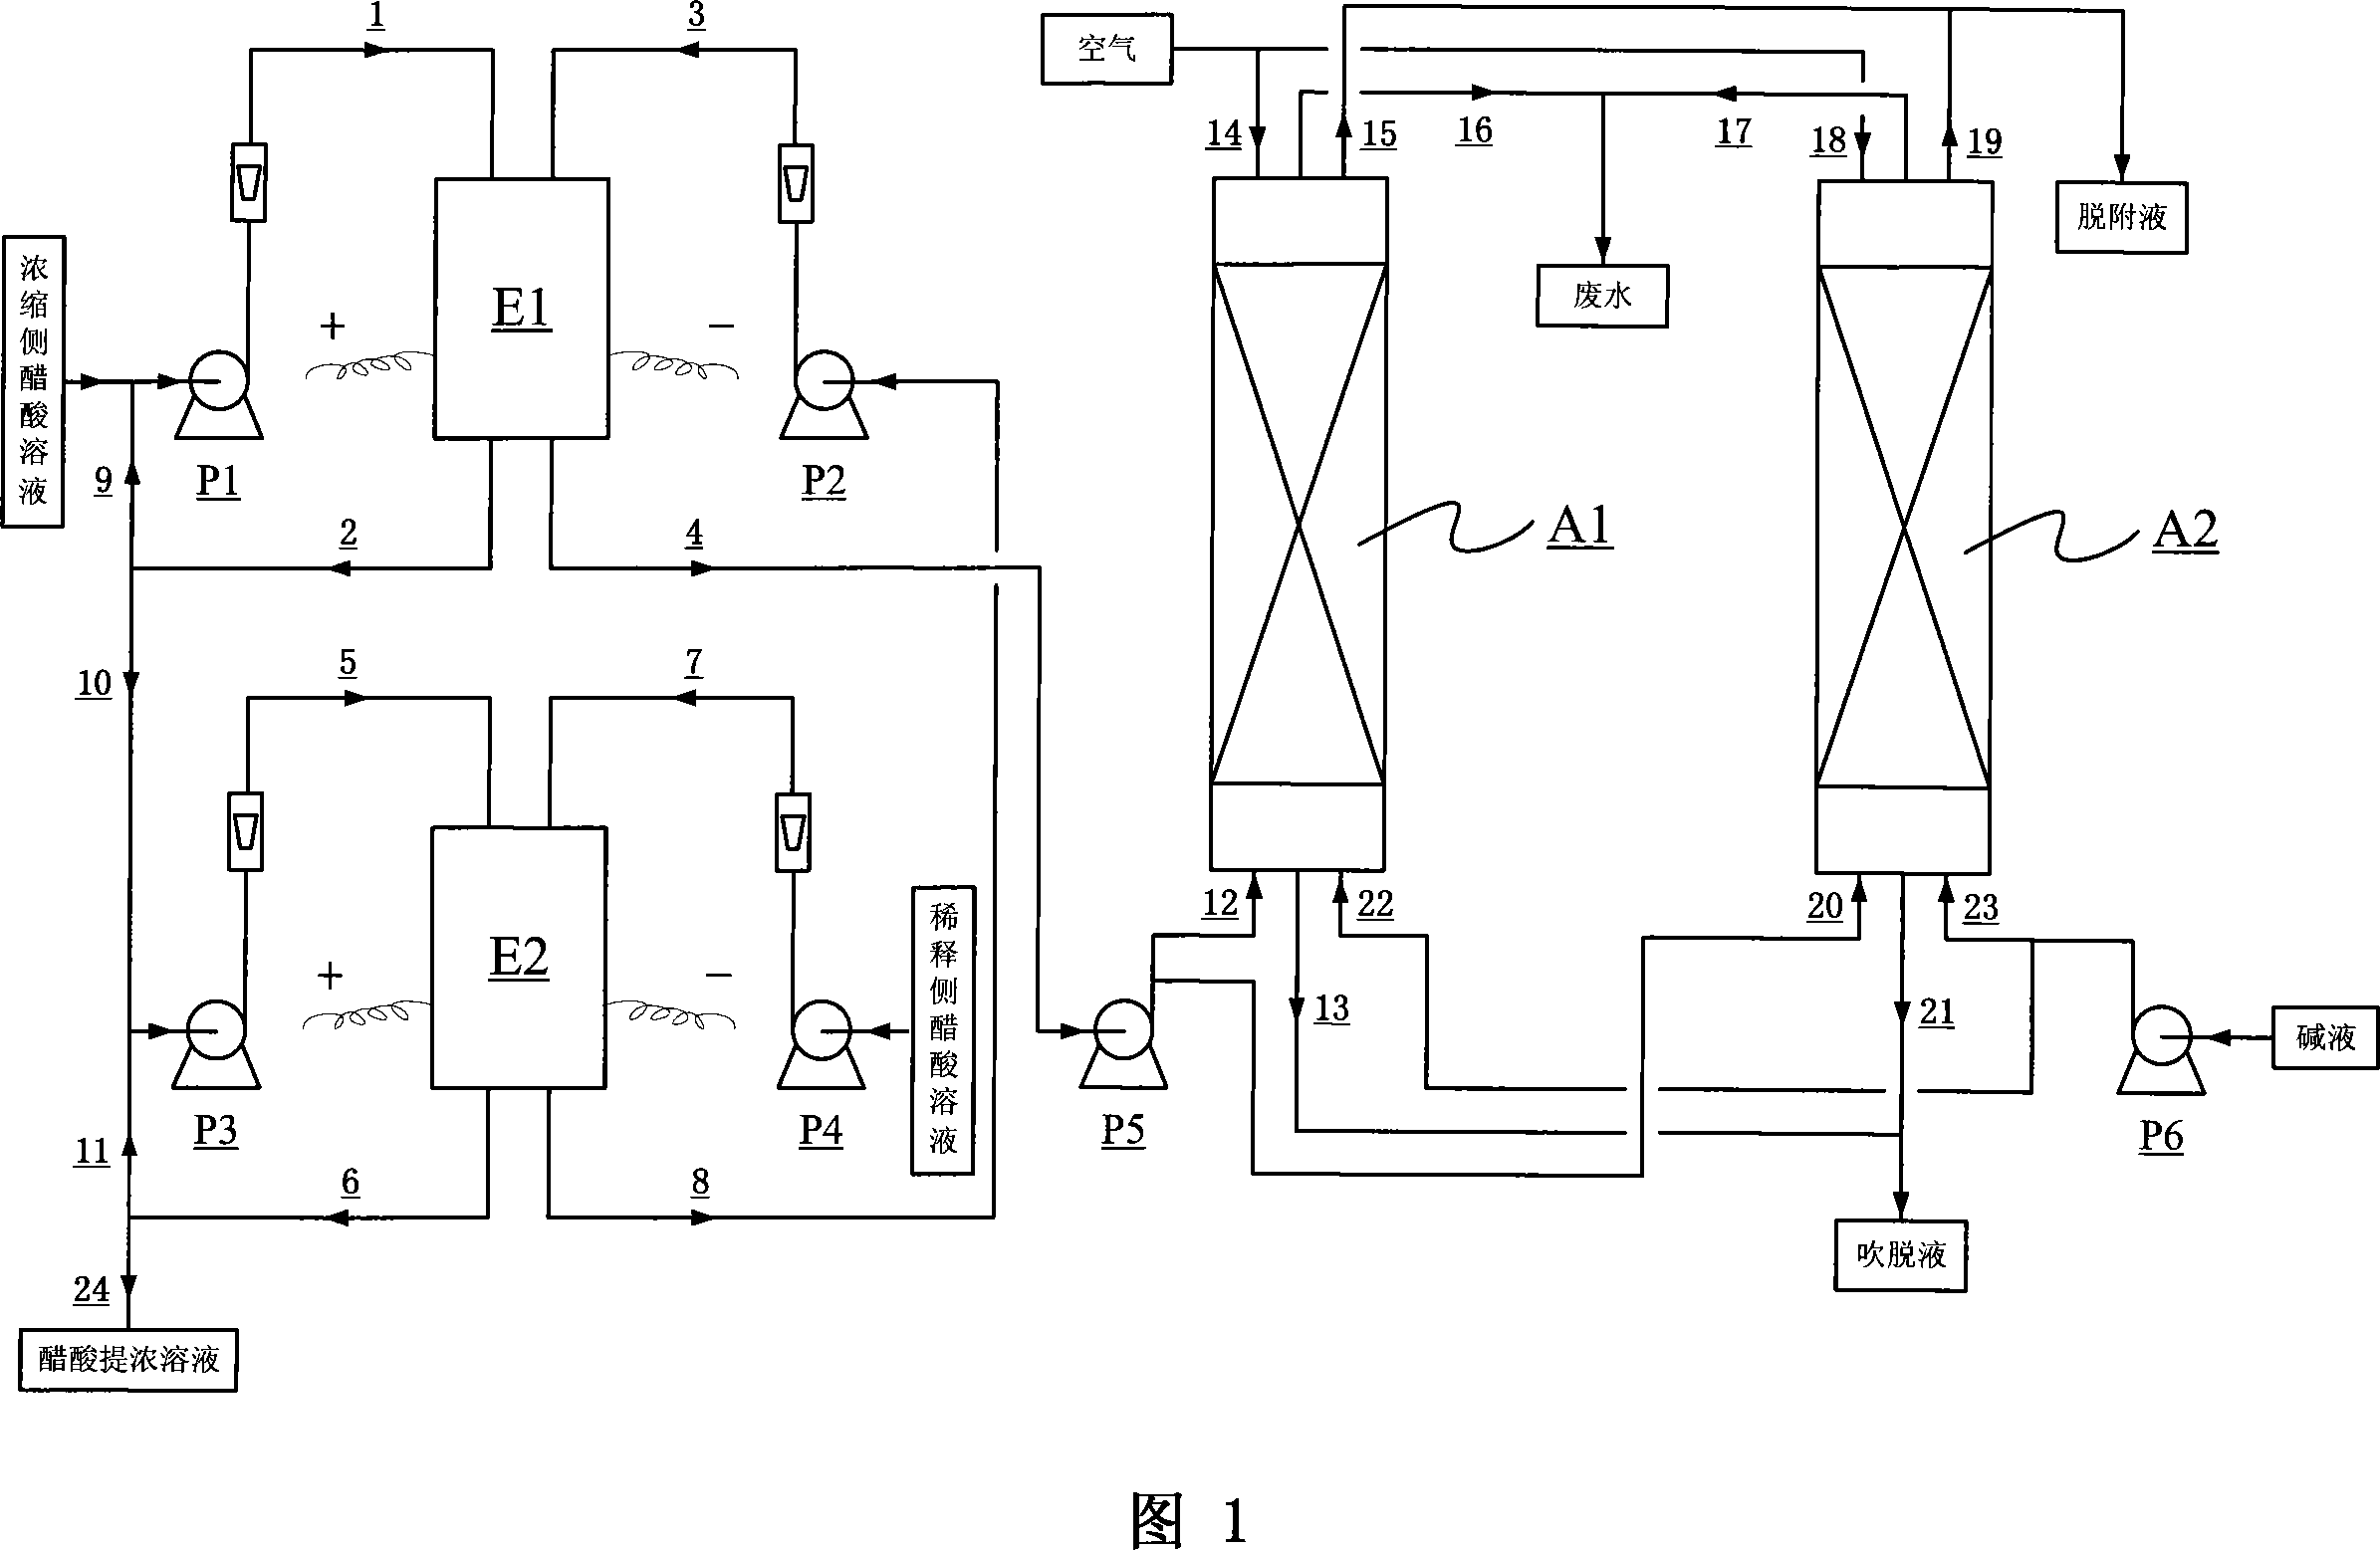 Method for reclaiming acetic acid from waste water containing dilute acetic acid